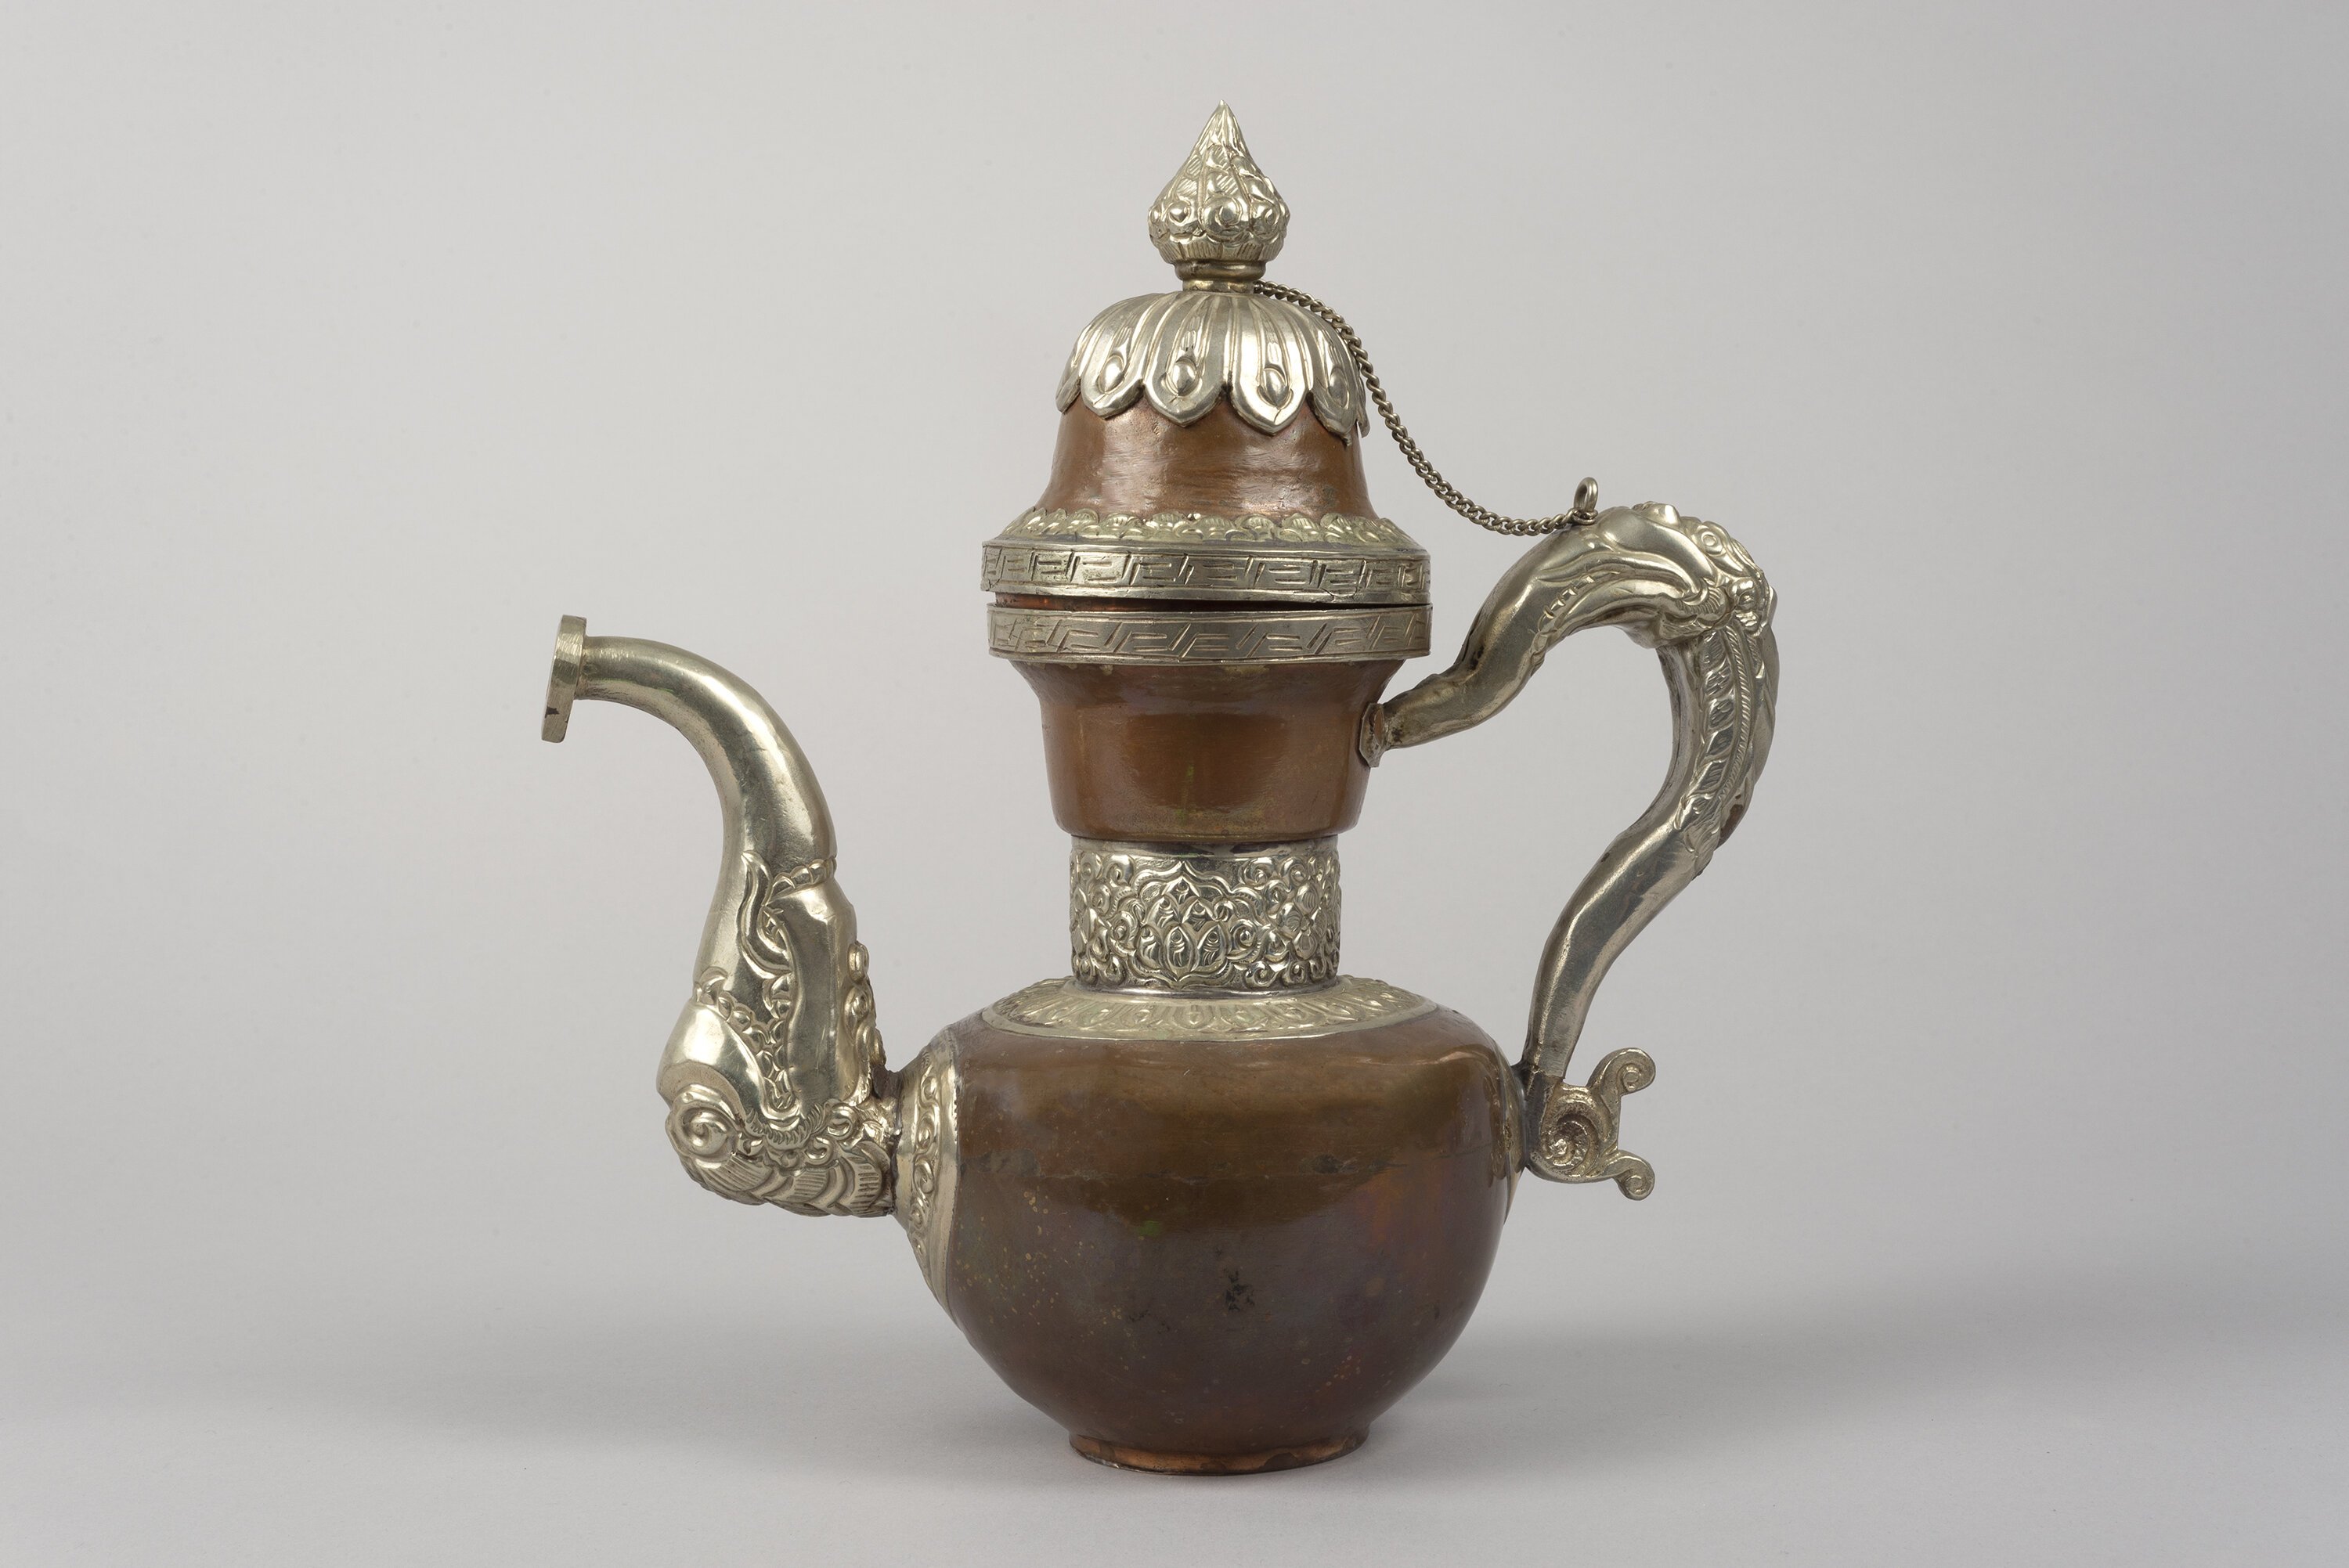 Tibetan Teapot. 19th century. Brass with silver overlay, 8 5/16 × 8 7/8 in. (21.1 × 22.5 cm). Gift of F. Karel Wiest. 1982.240.